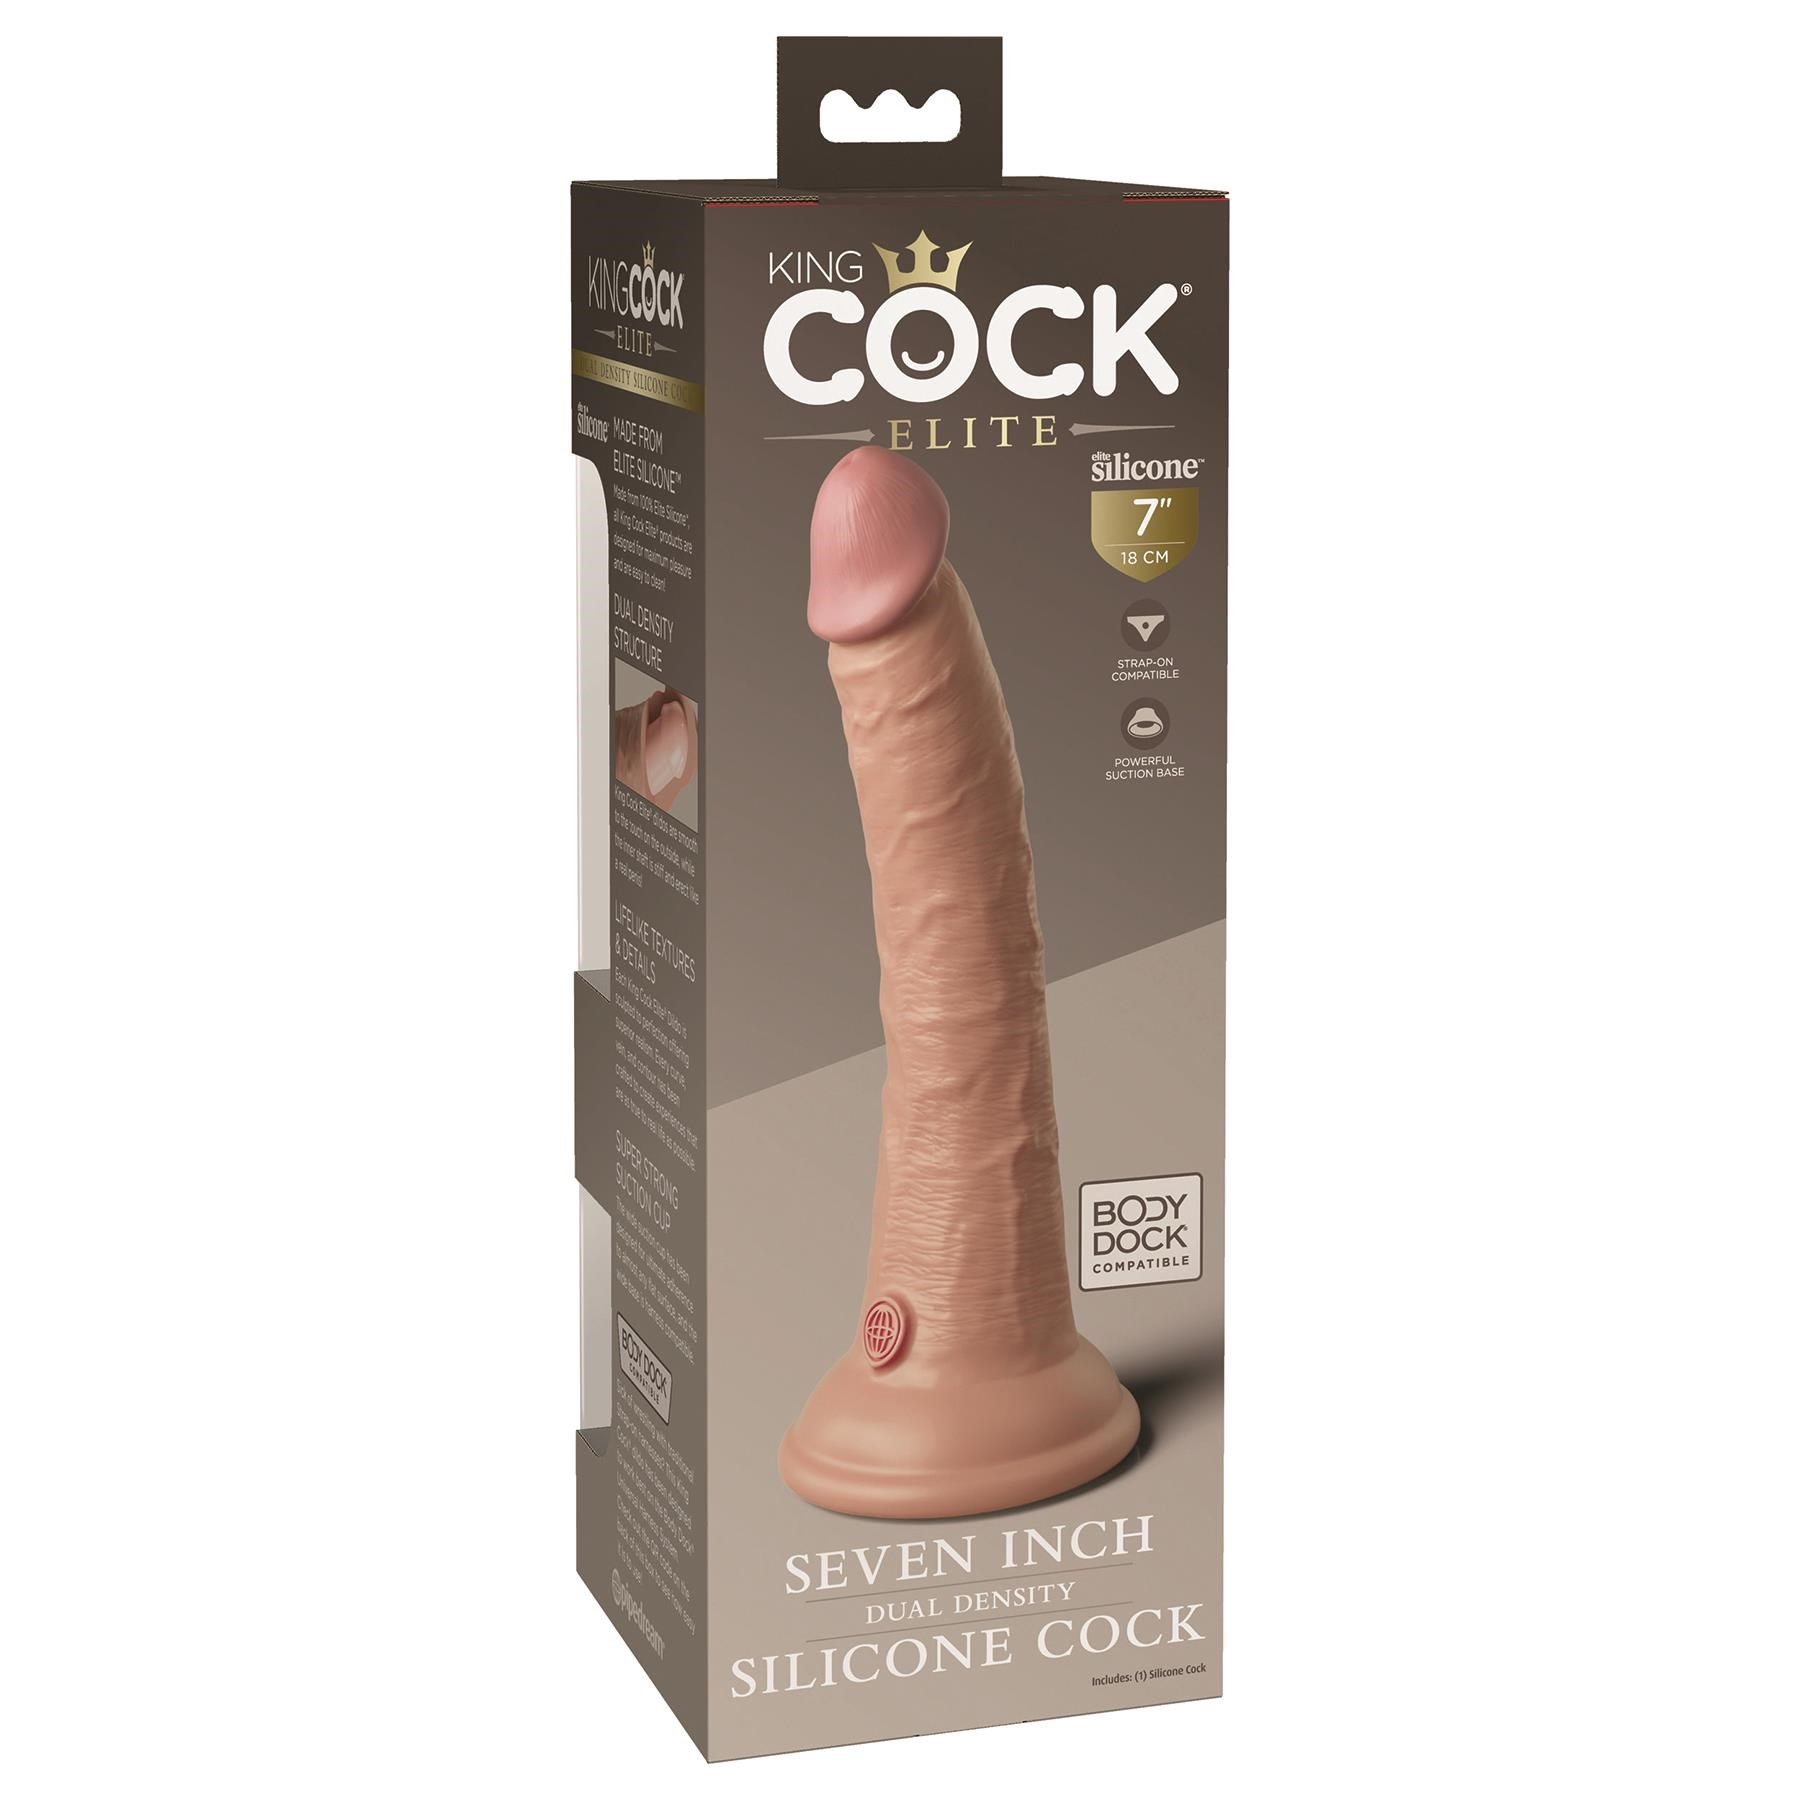 Kingcock Elite 7 Inch Dual Density Silicone Dildo - Packaging #2